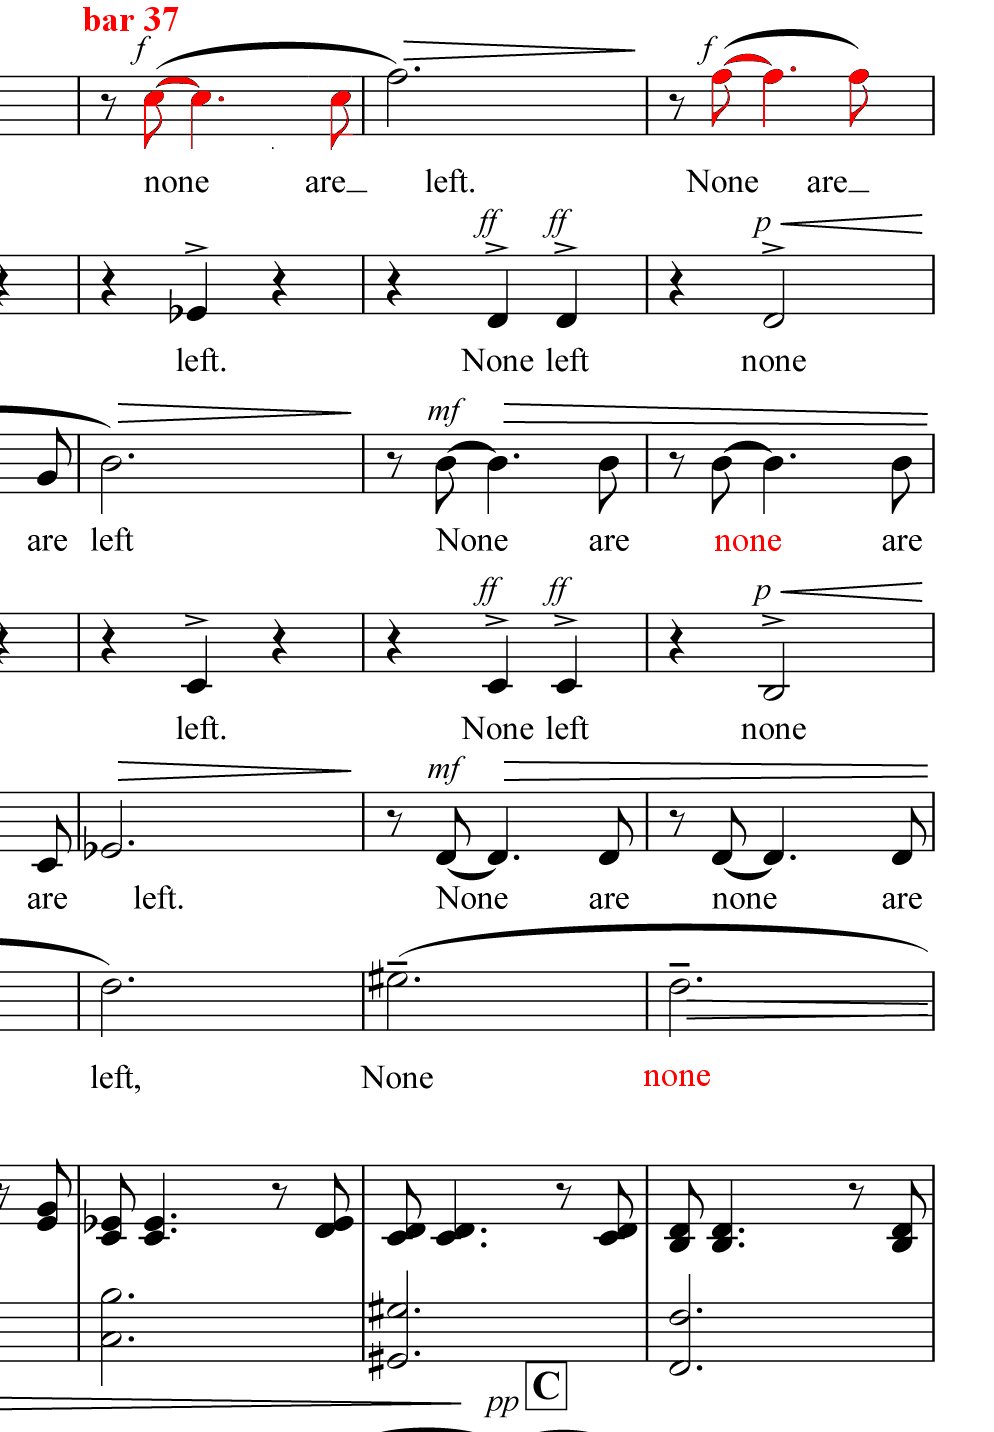 Lament corrections for Soprano 1 & Bass parts